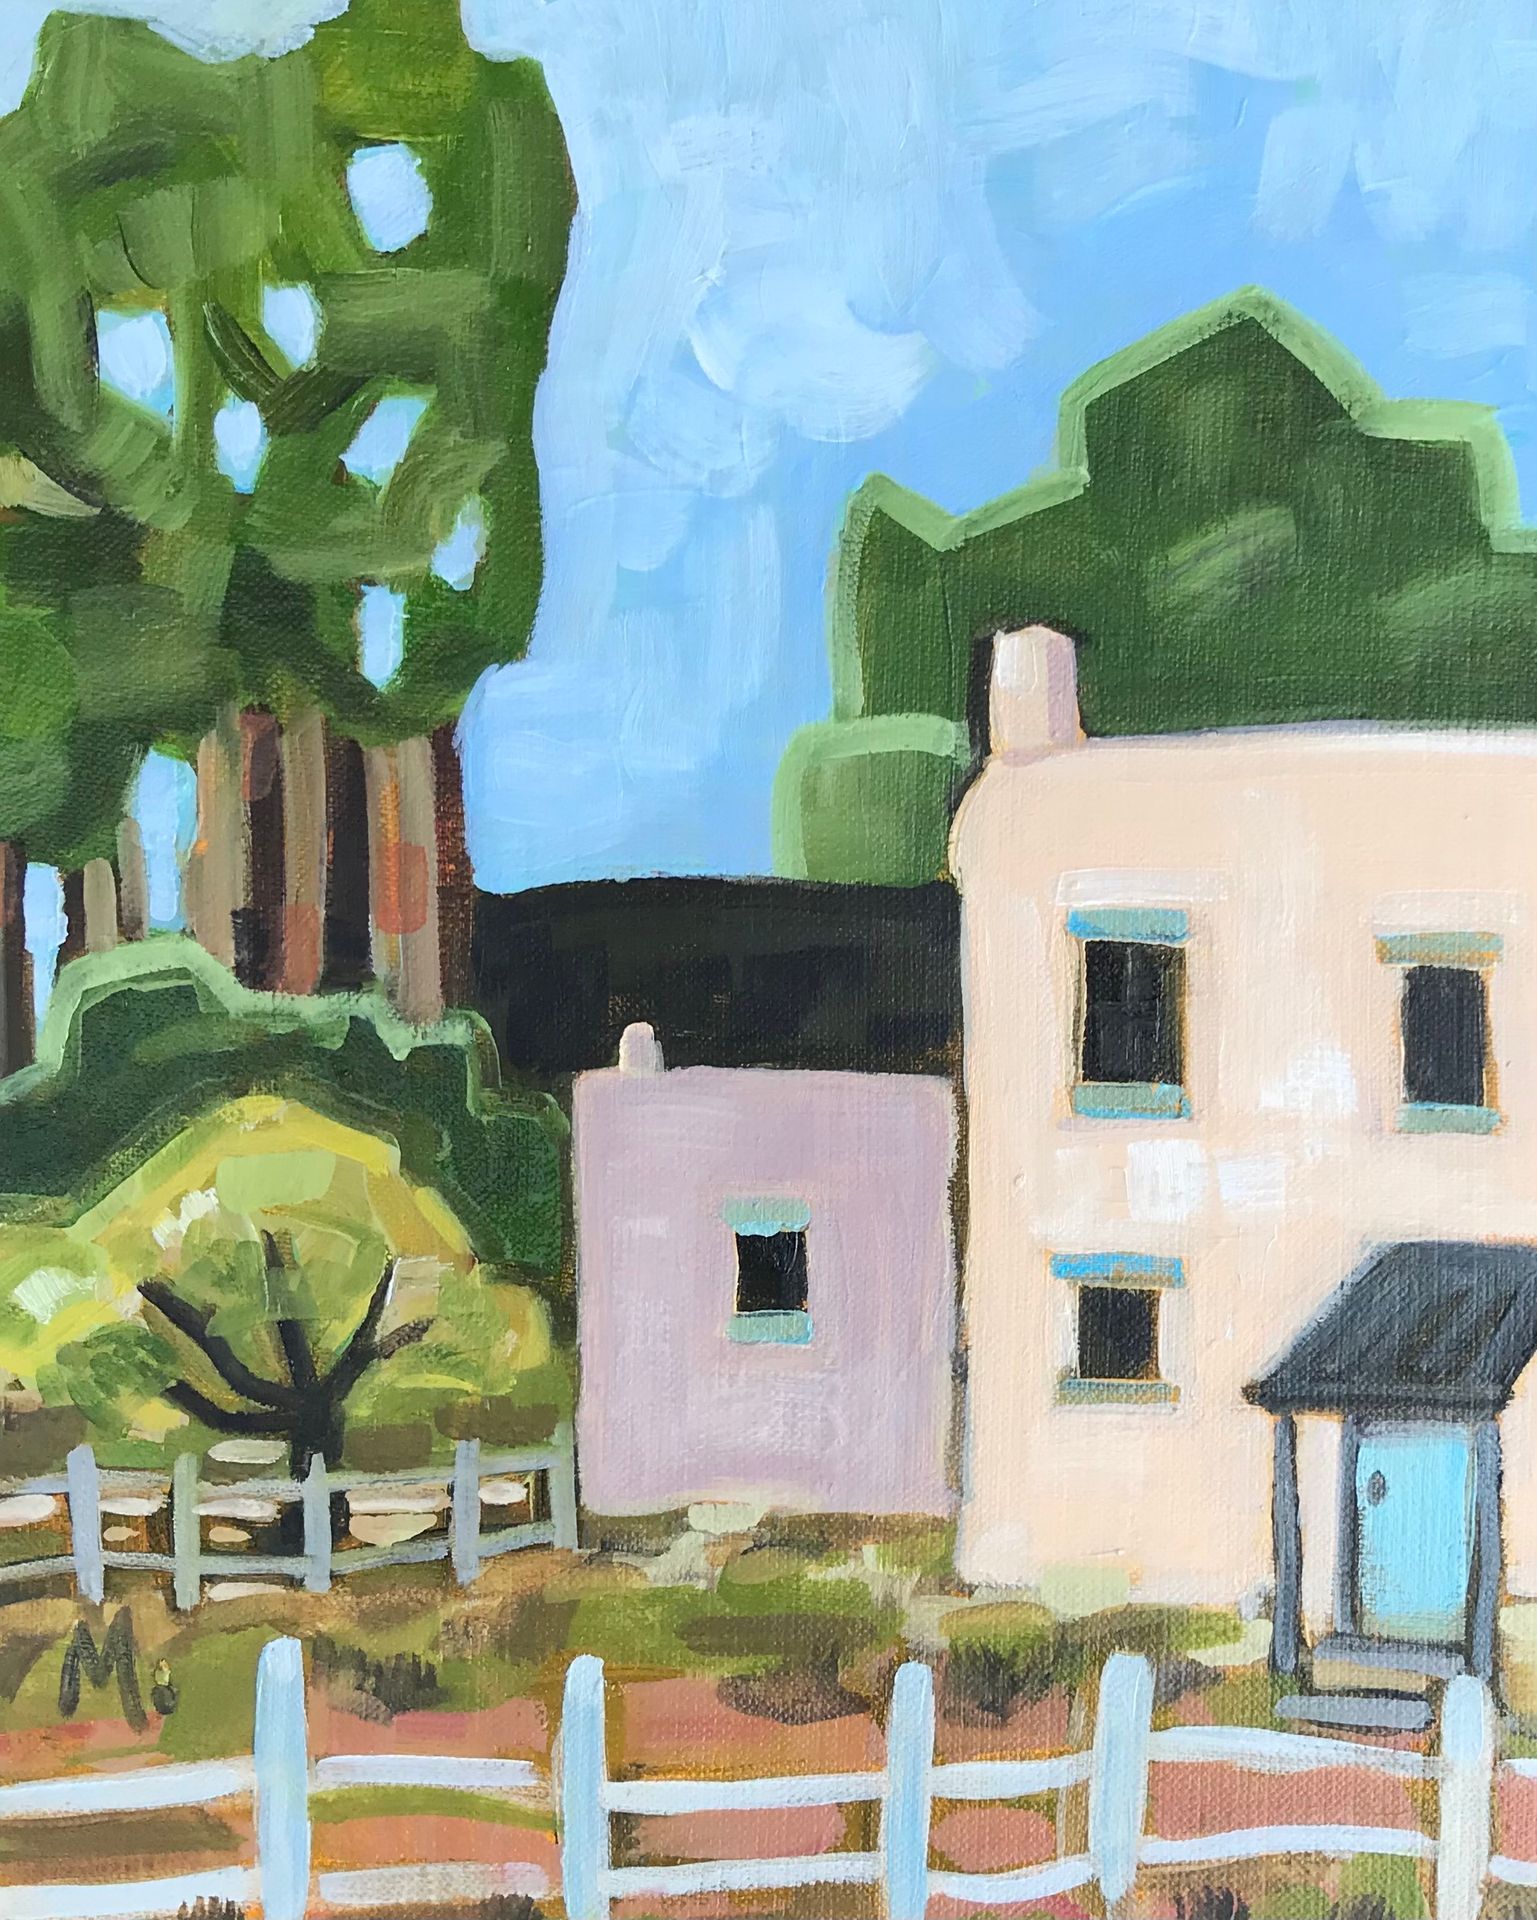 "Backyards," oil on linen panel by Melwell, 10x8